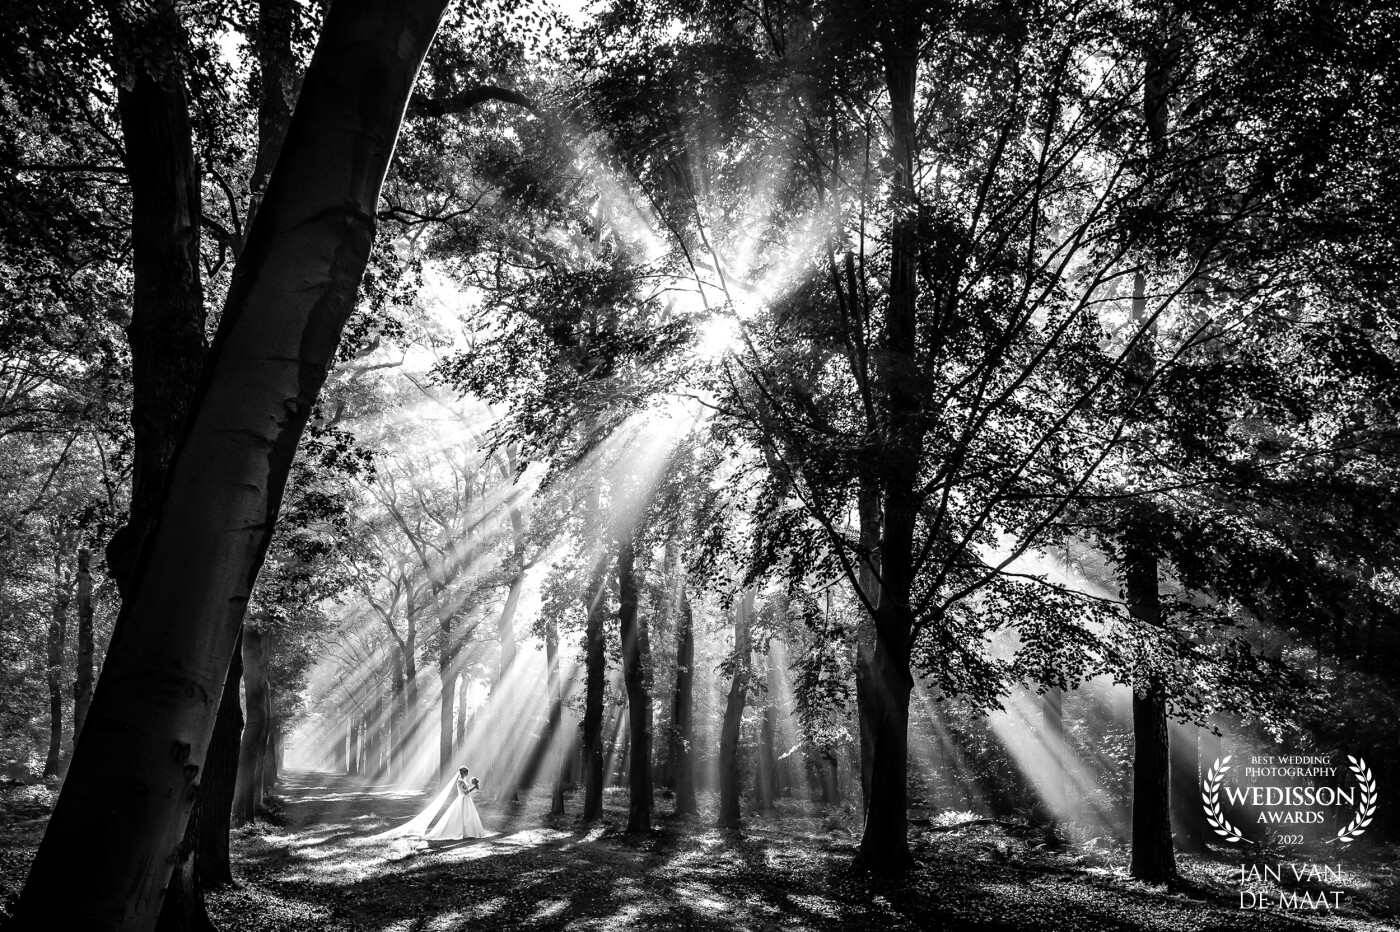 I love light rays and autumn is the season to see them. We were quite early in the morning for the formal photoshoot and we got rewarded by a stunning display of sunrays everywhere. A bit confused where to place the couple I also knew I had to be fast; it could be gone in minutes. But I was lucky to photograph in these circumstances for about ten minutes or so before it vanished.